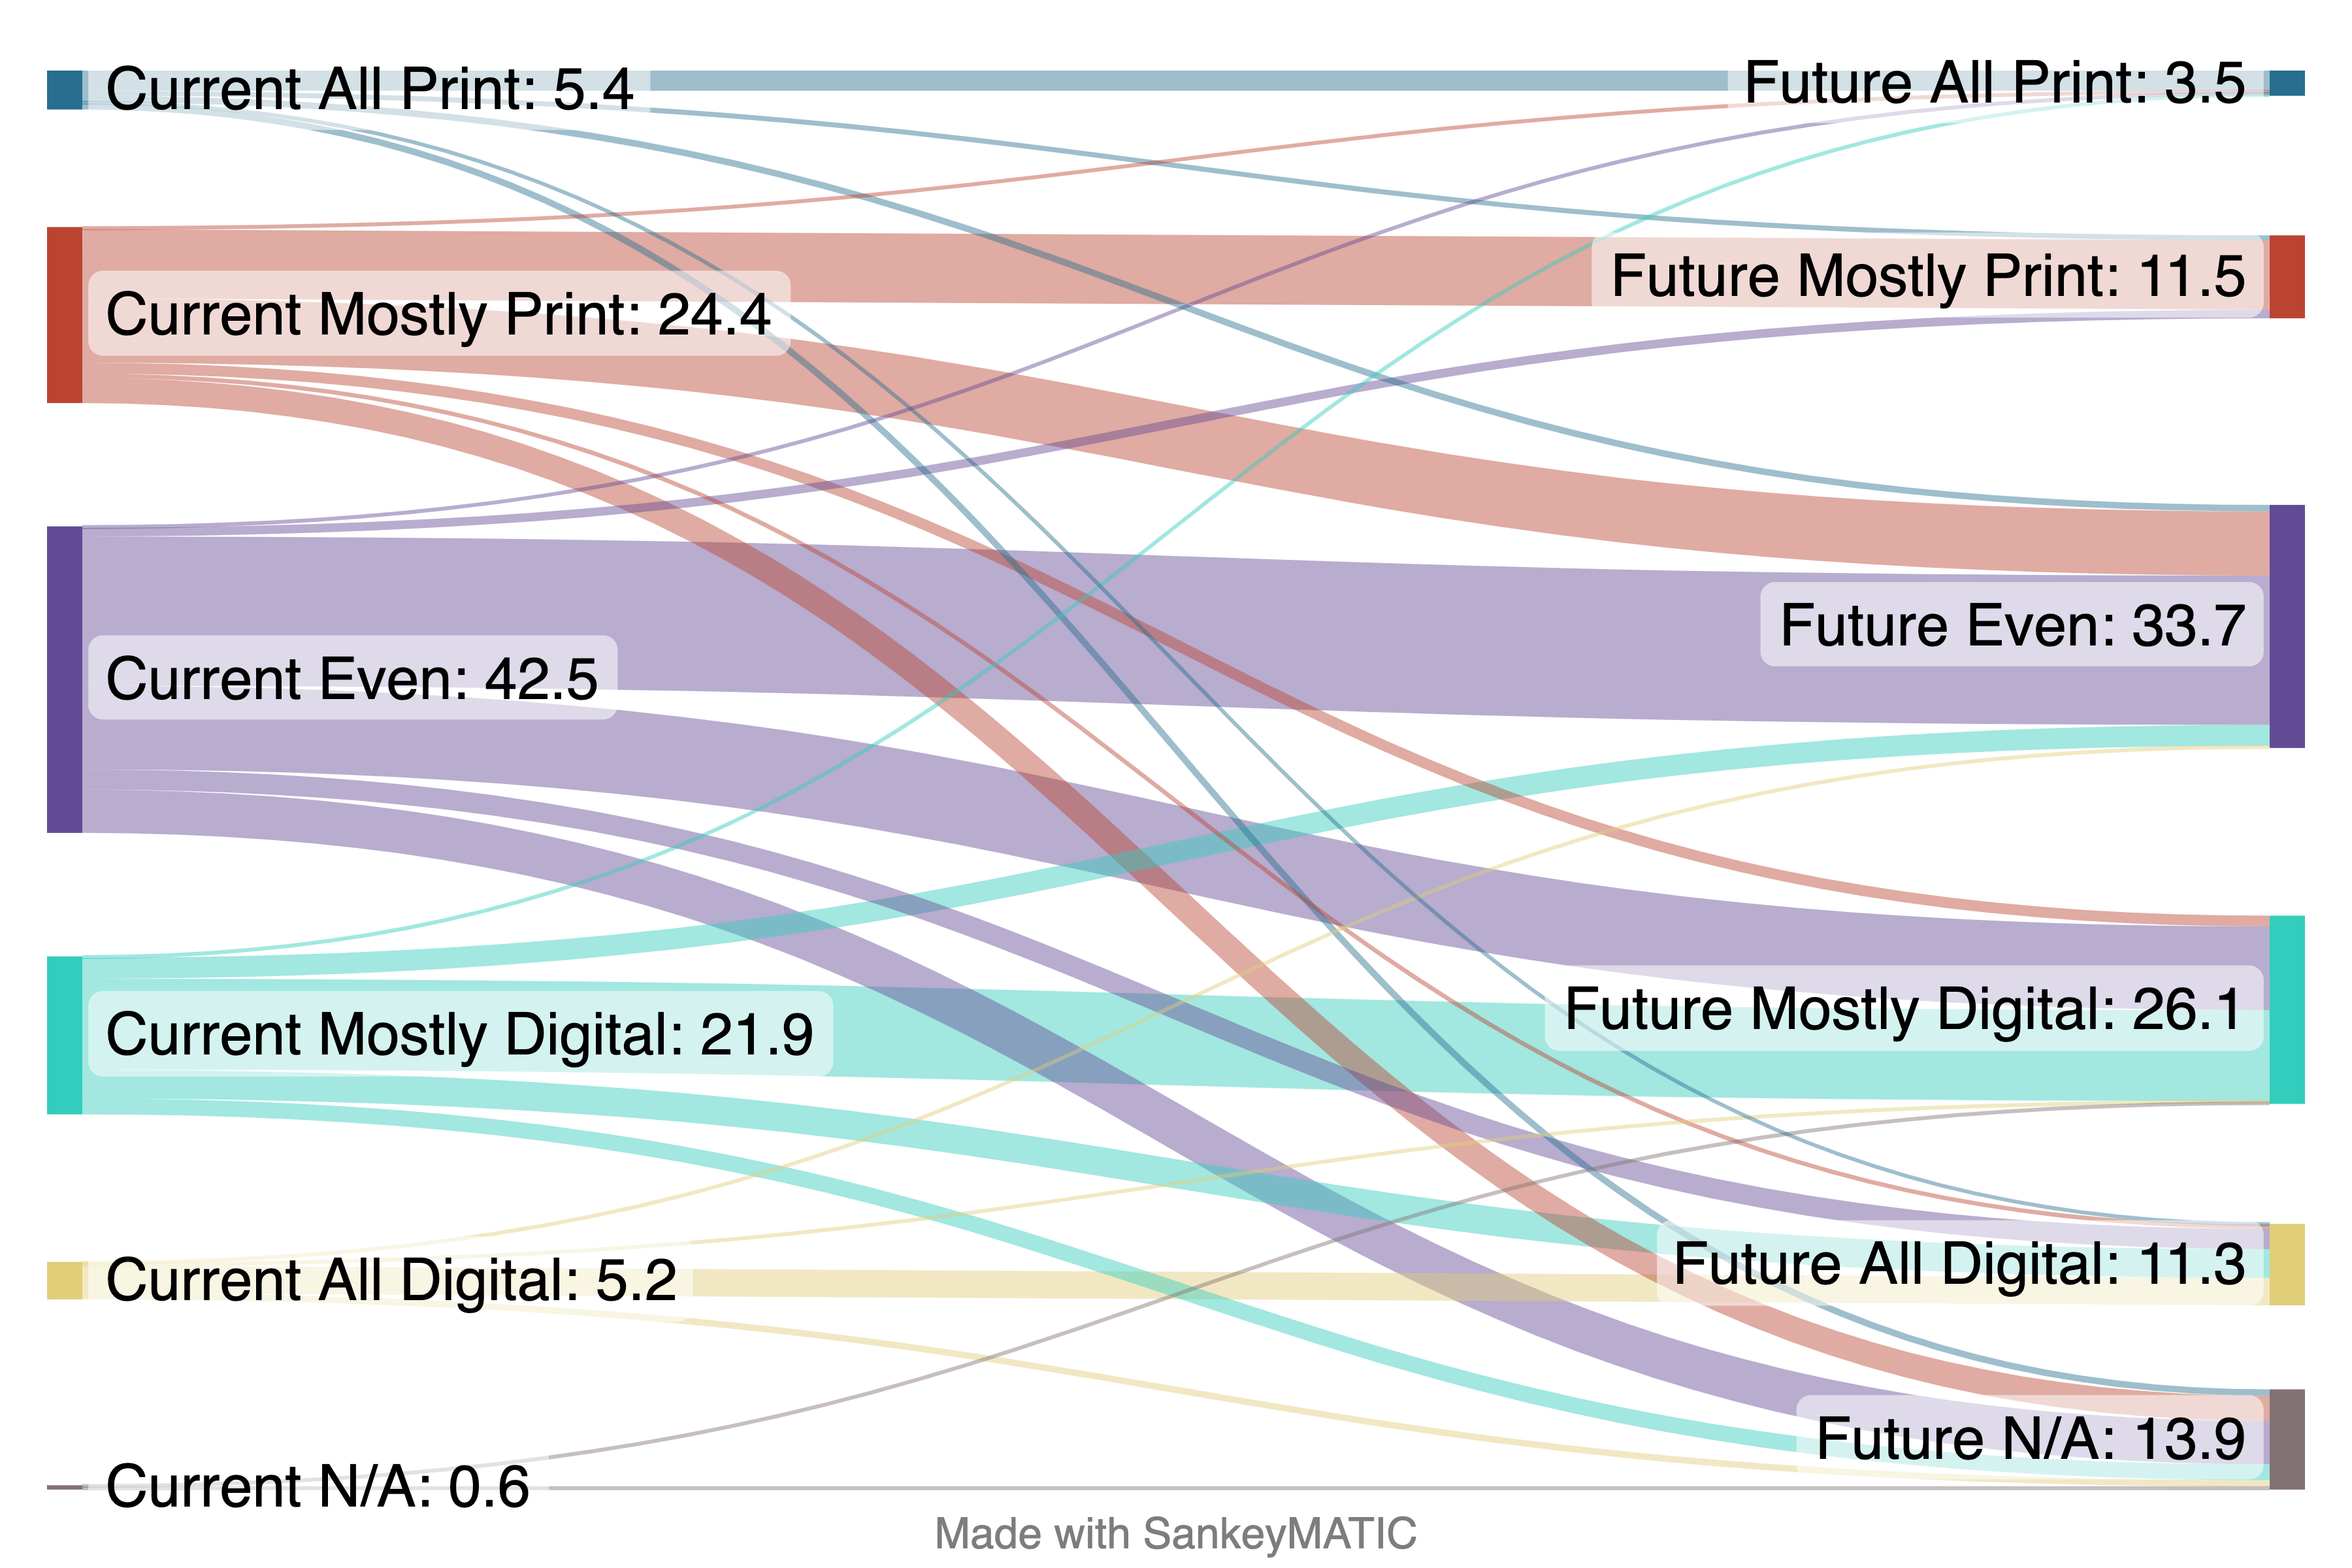 Future growth for digital